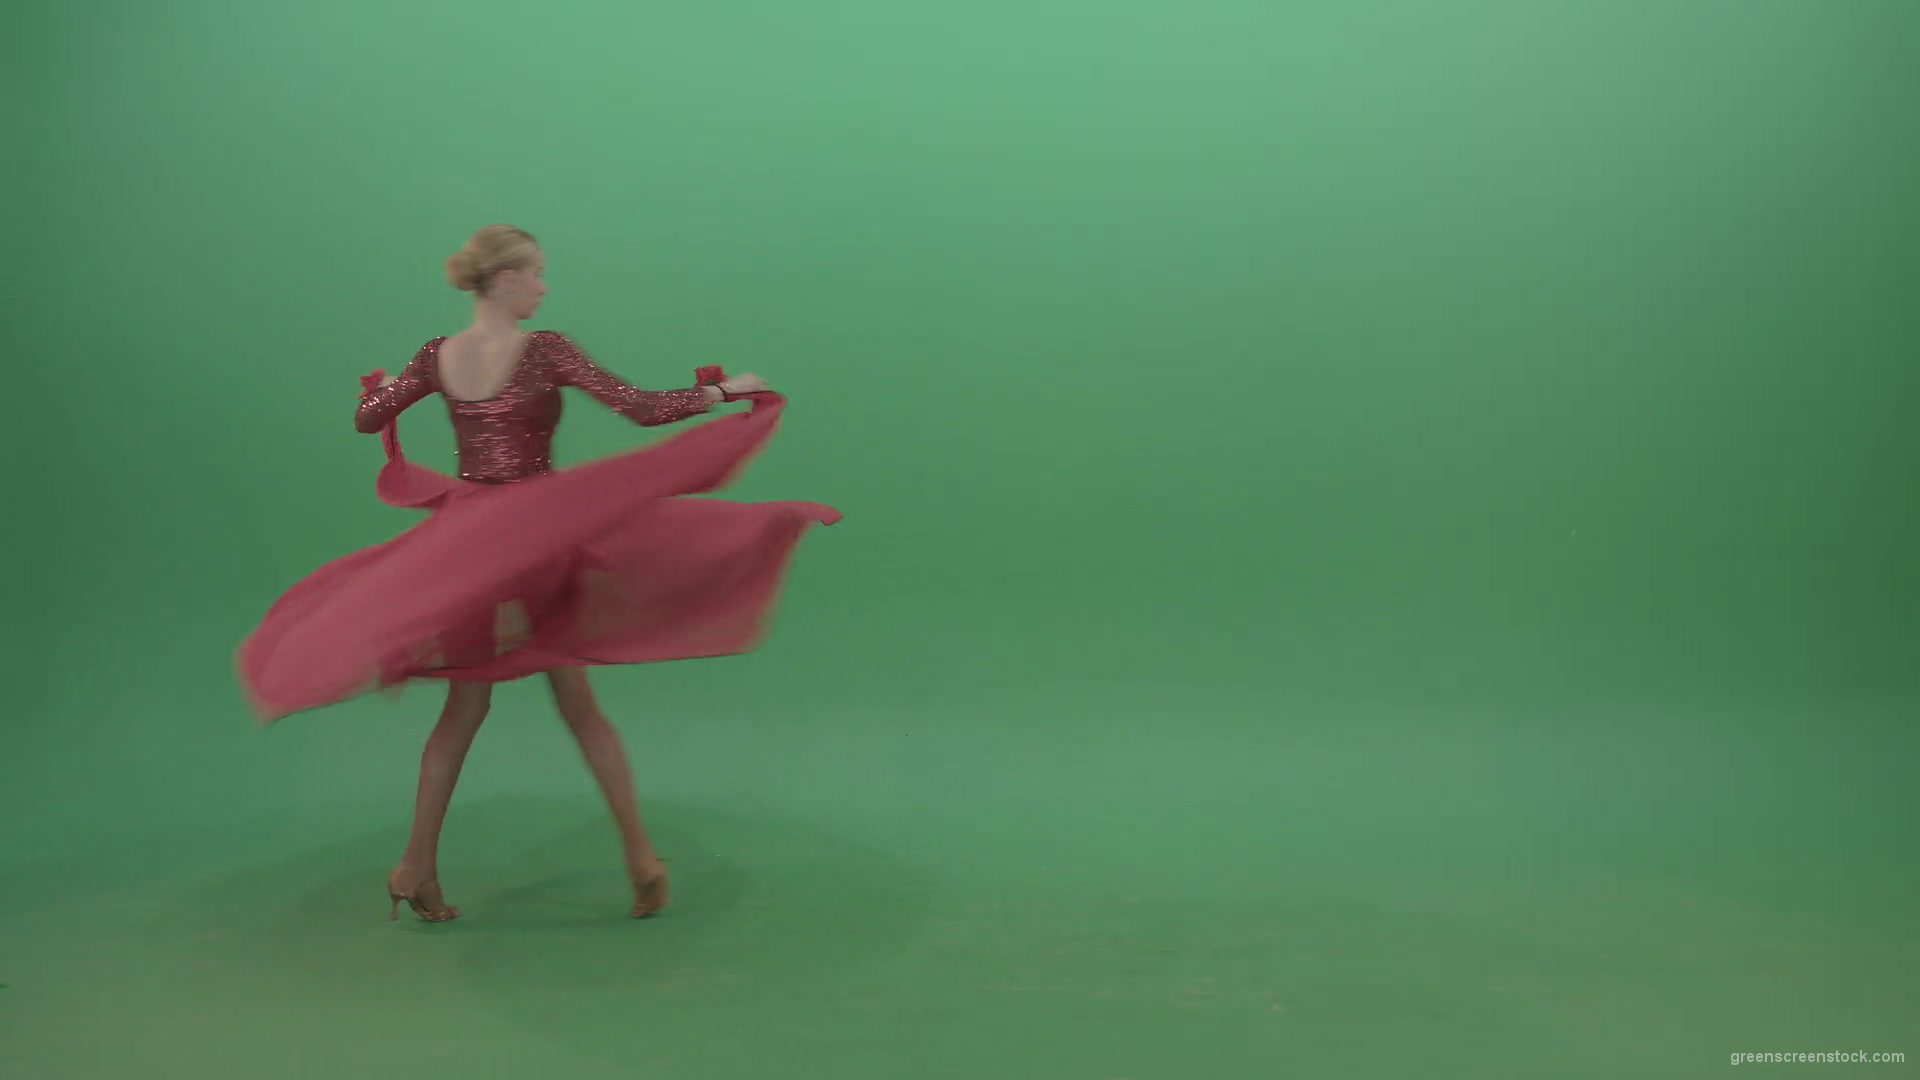 Girl-in-red-dress-moving-from-left-to-right-spinning-in-flower-passion-dance-on-green-screen-4K-Video-Footage-1920_004 Green Screen Stock